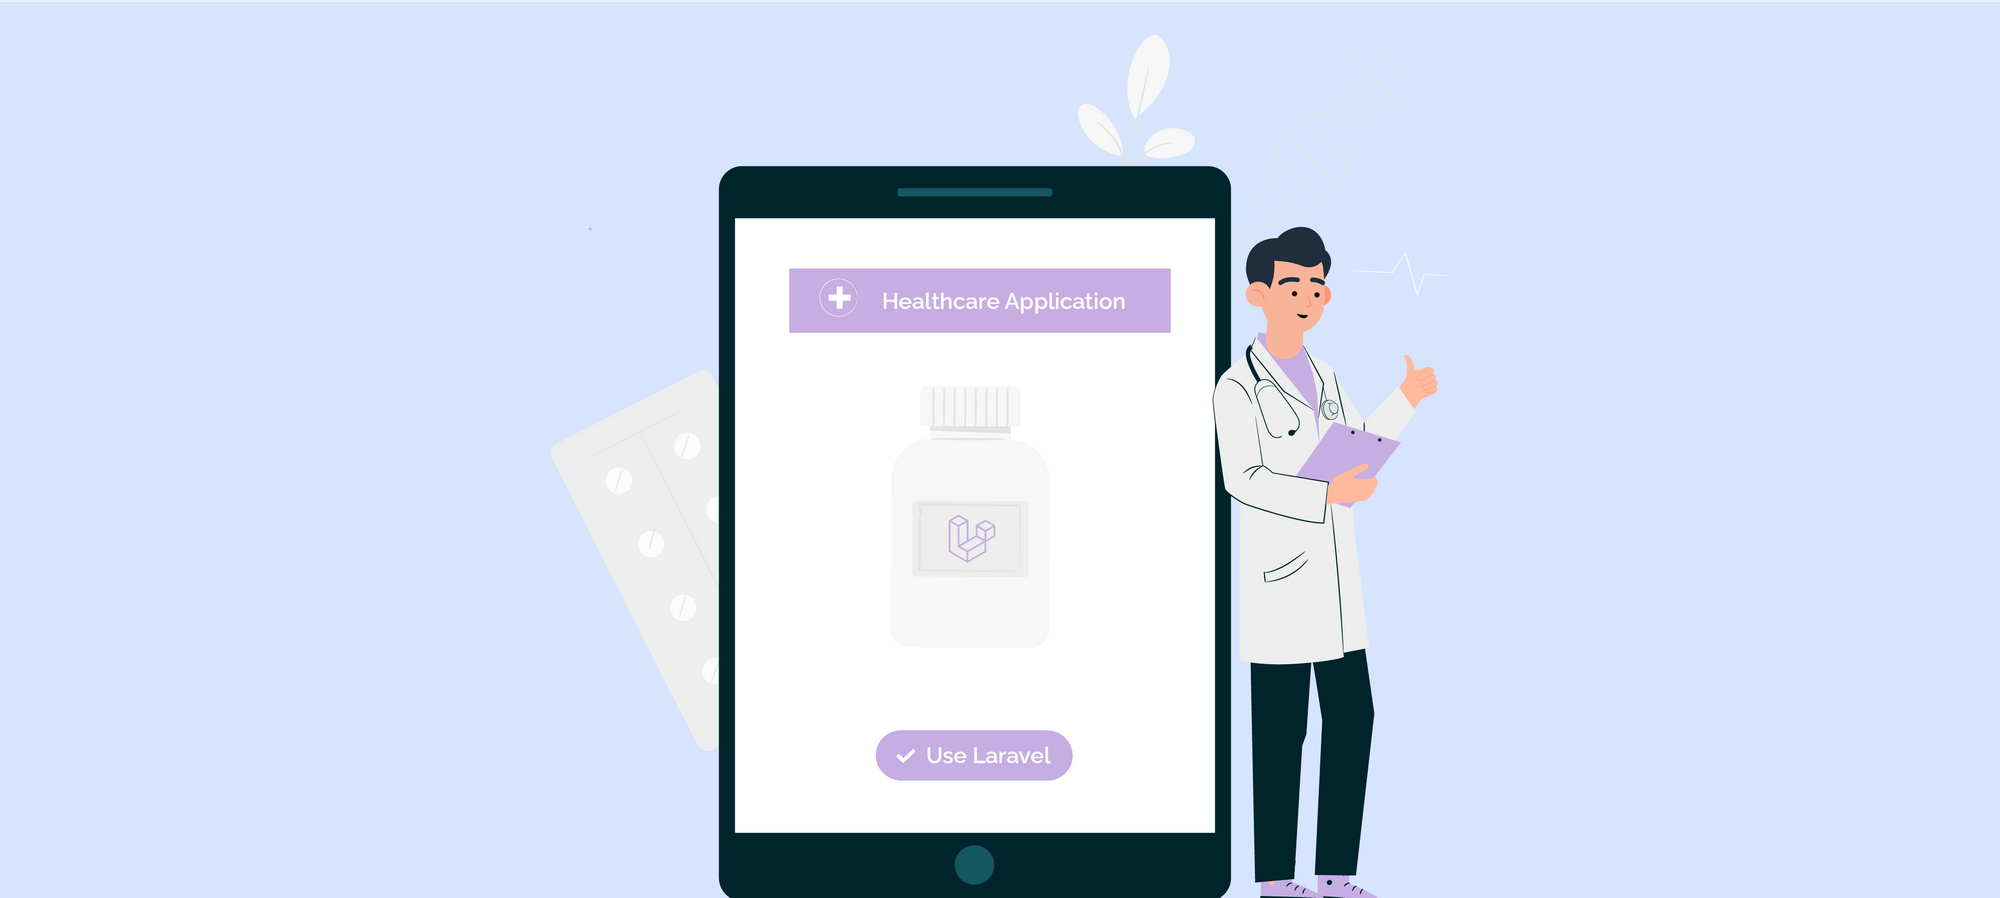 Why choose Laravel for your next Healthcare Application